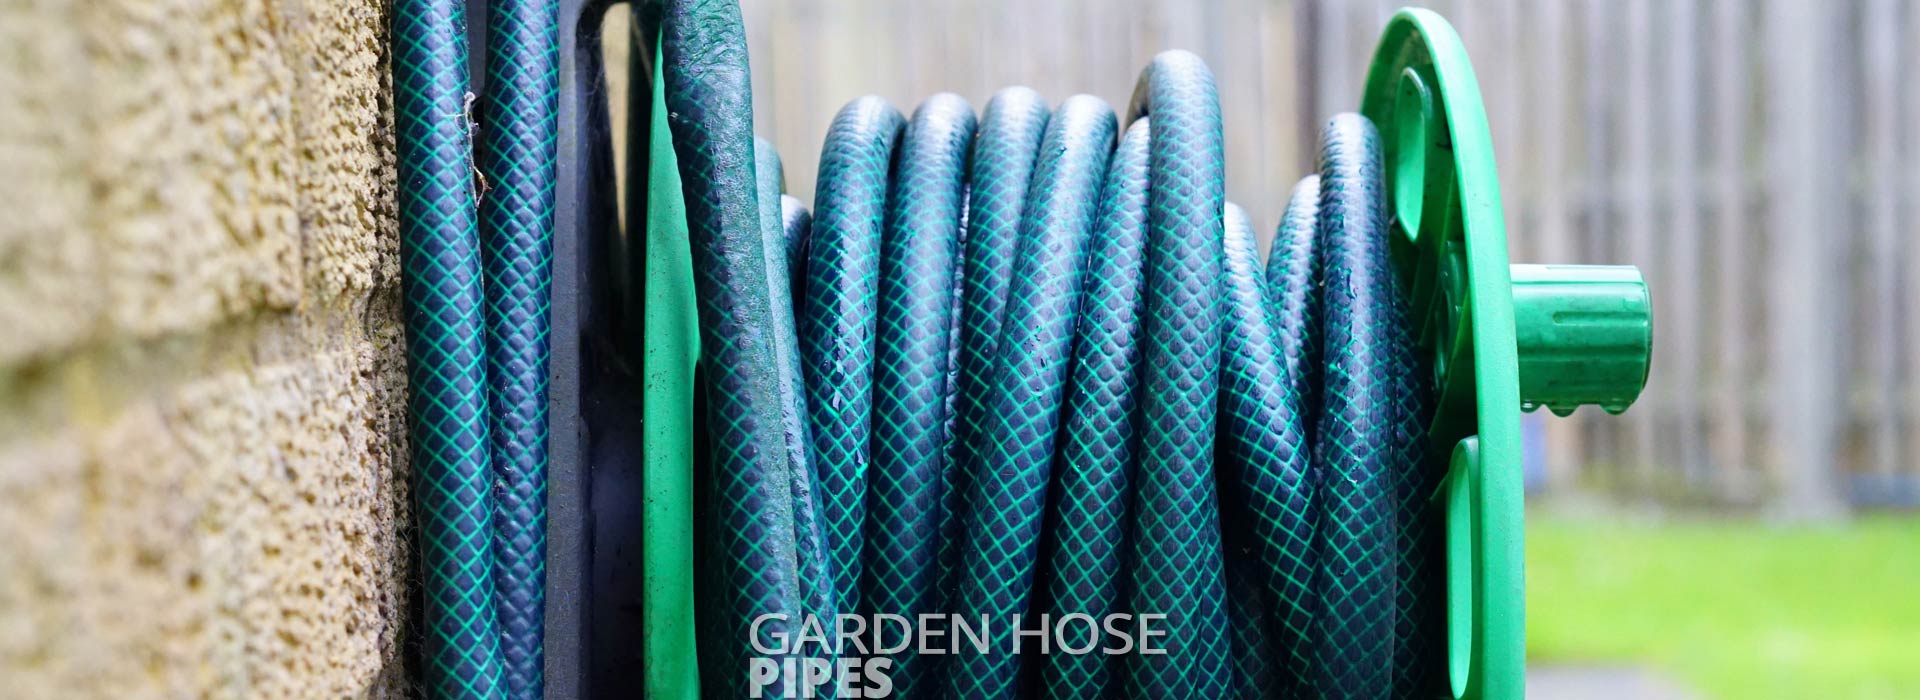 Garden Hose Pipes from Captain Pipes Ltd.